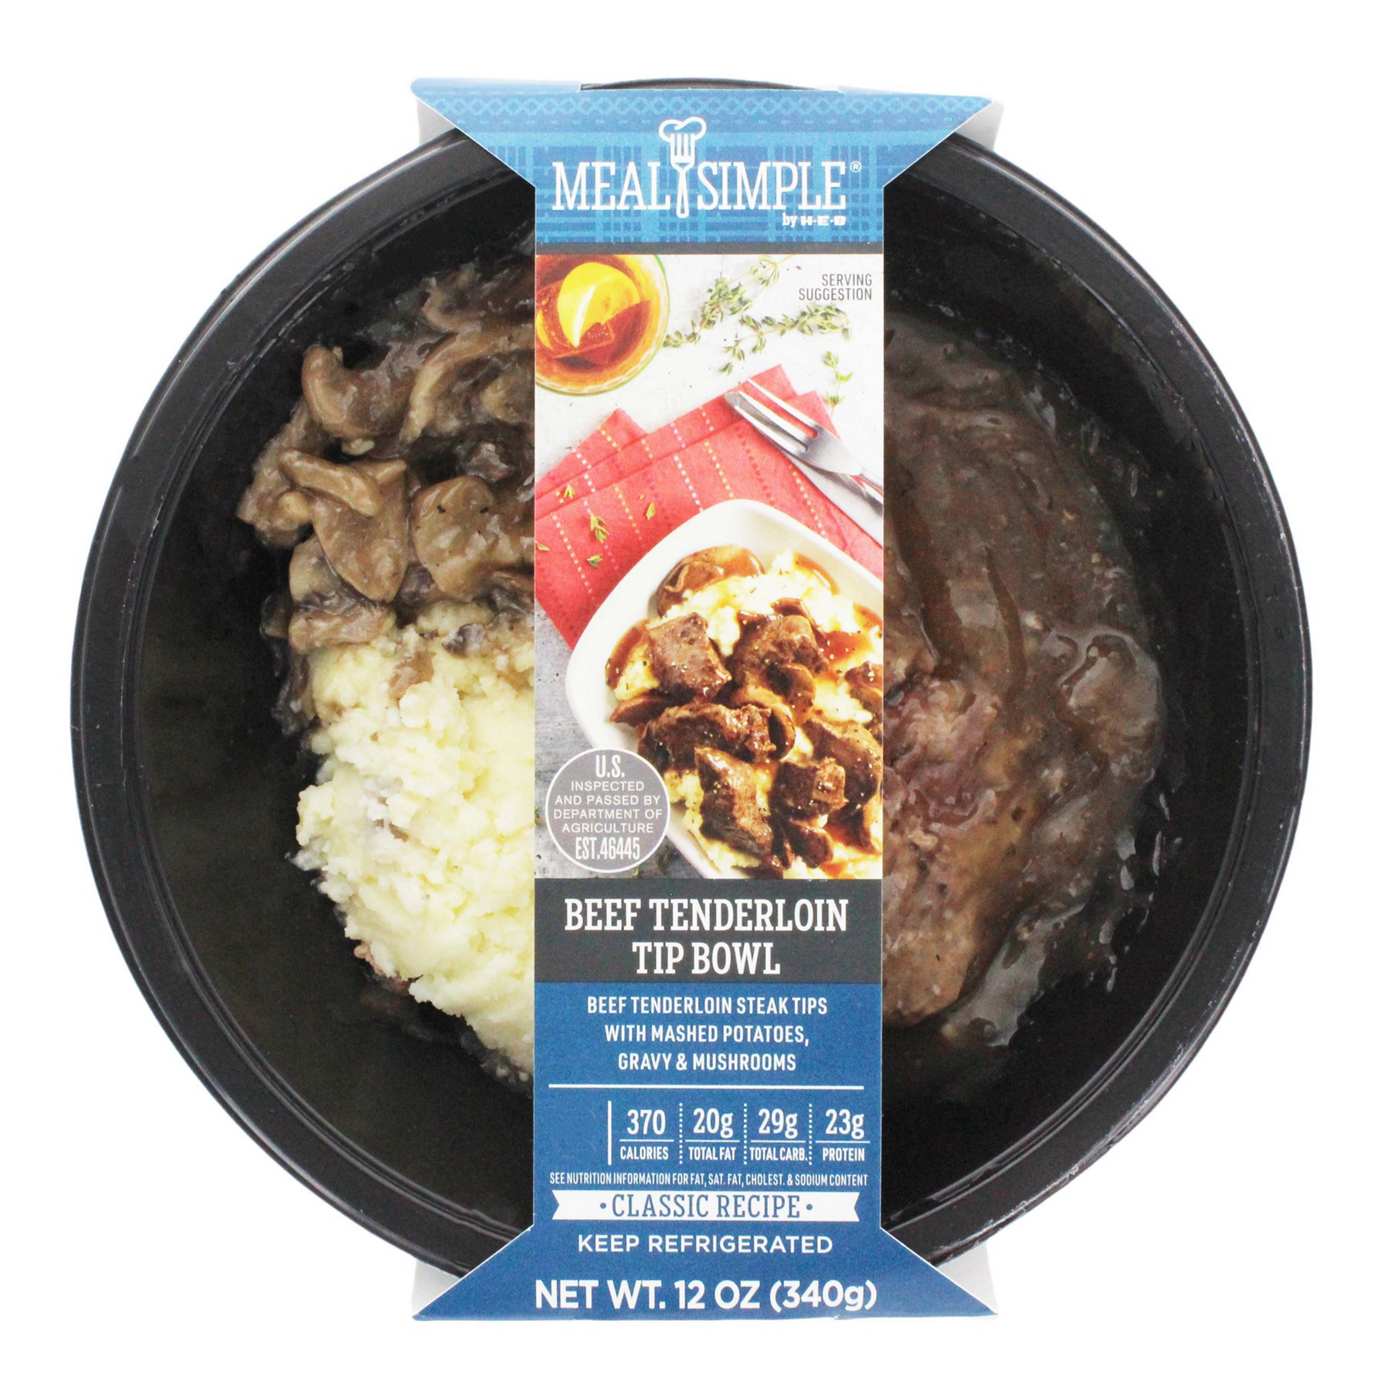 Meal Simple by H-E-B Beef Tenderloin Steak Tips Bowl; image 2 of 4